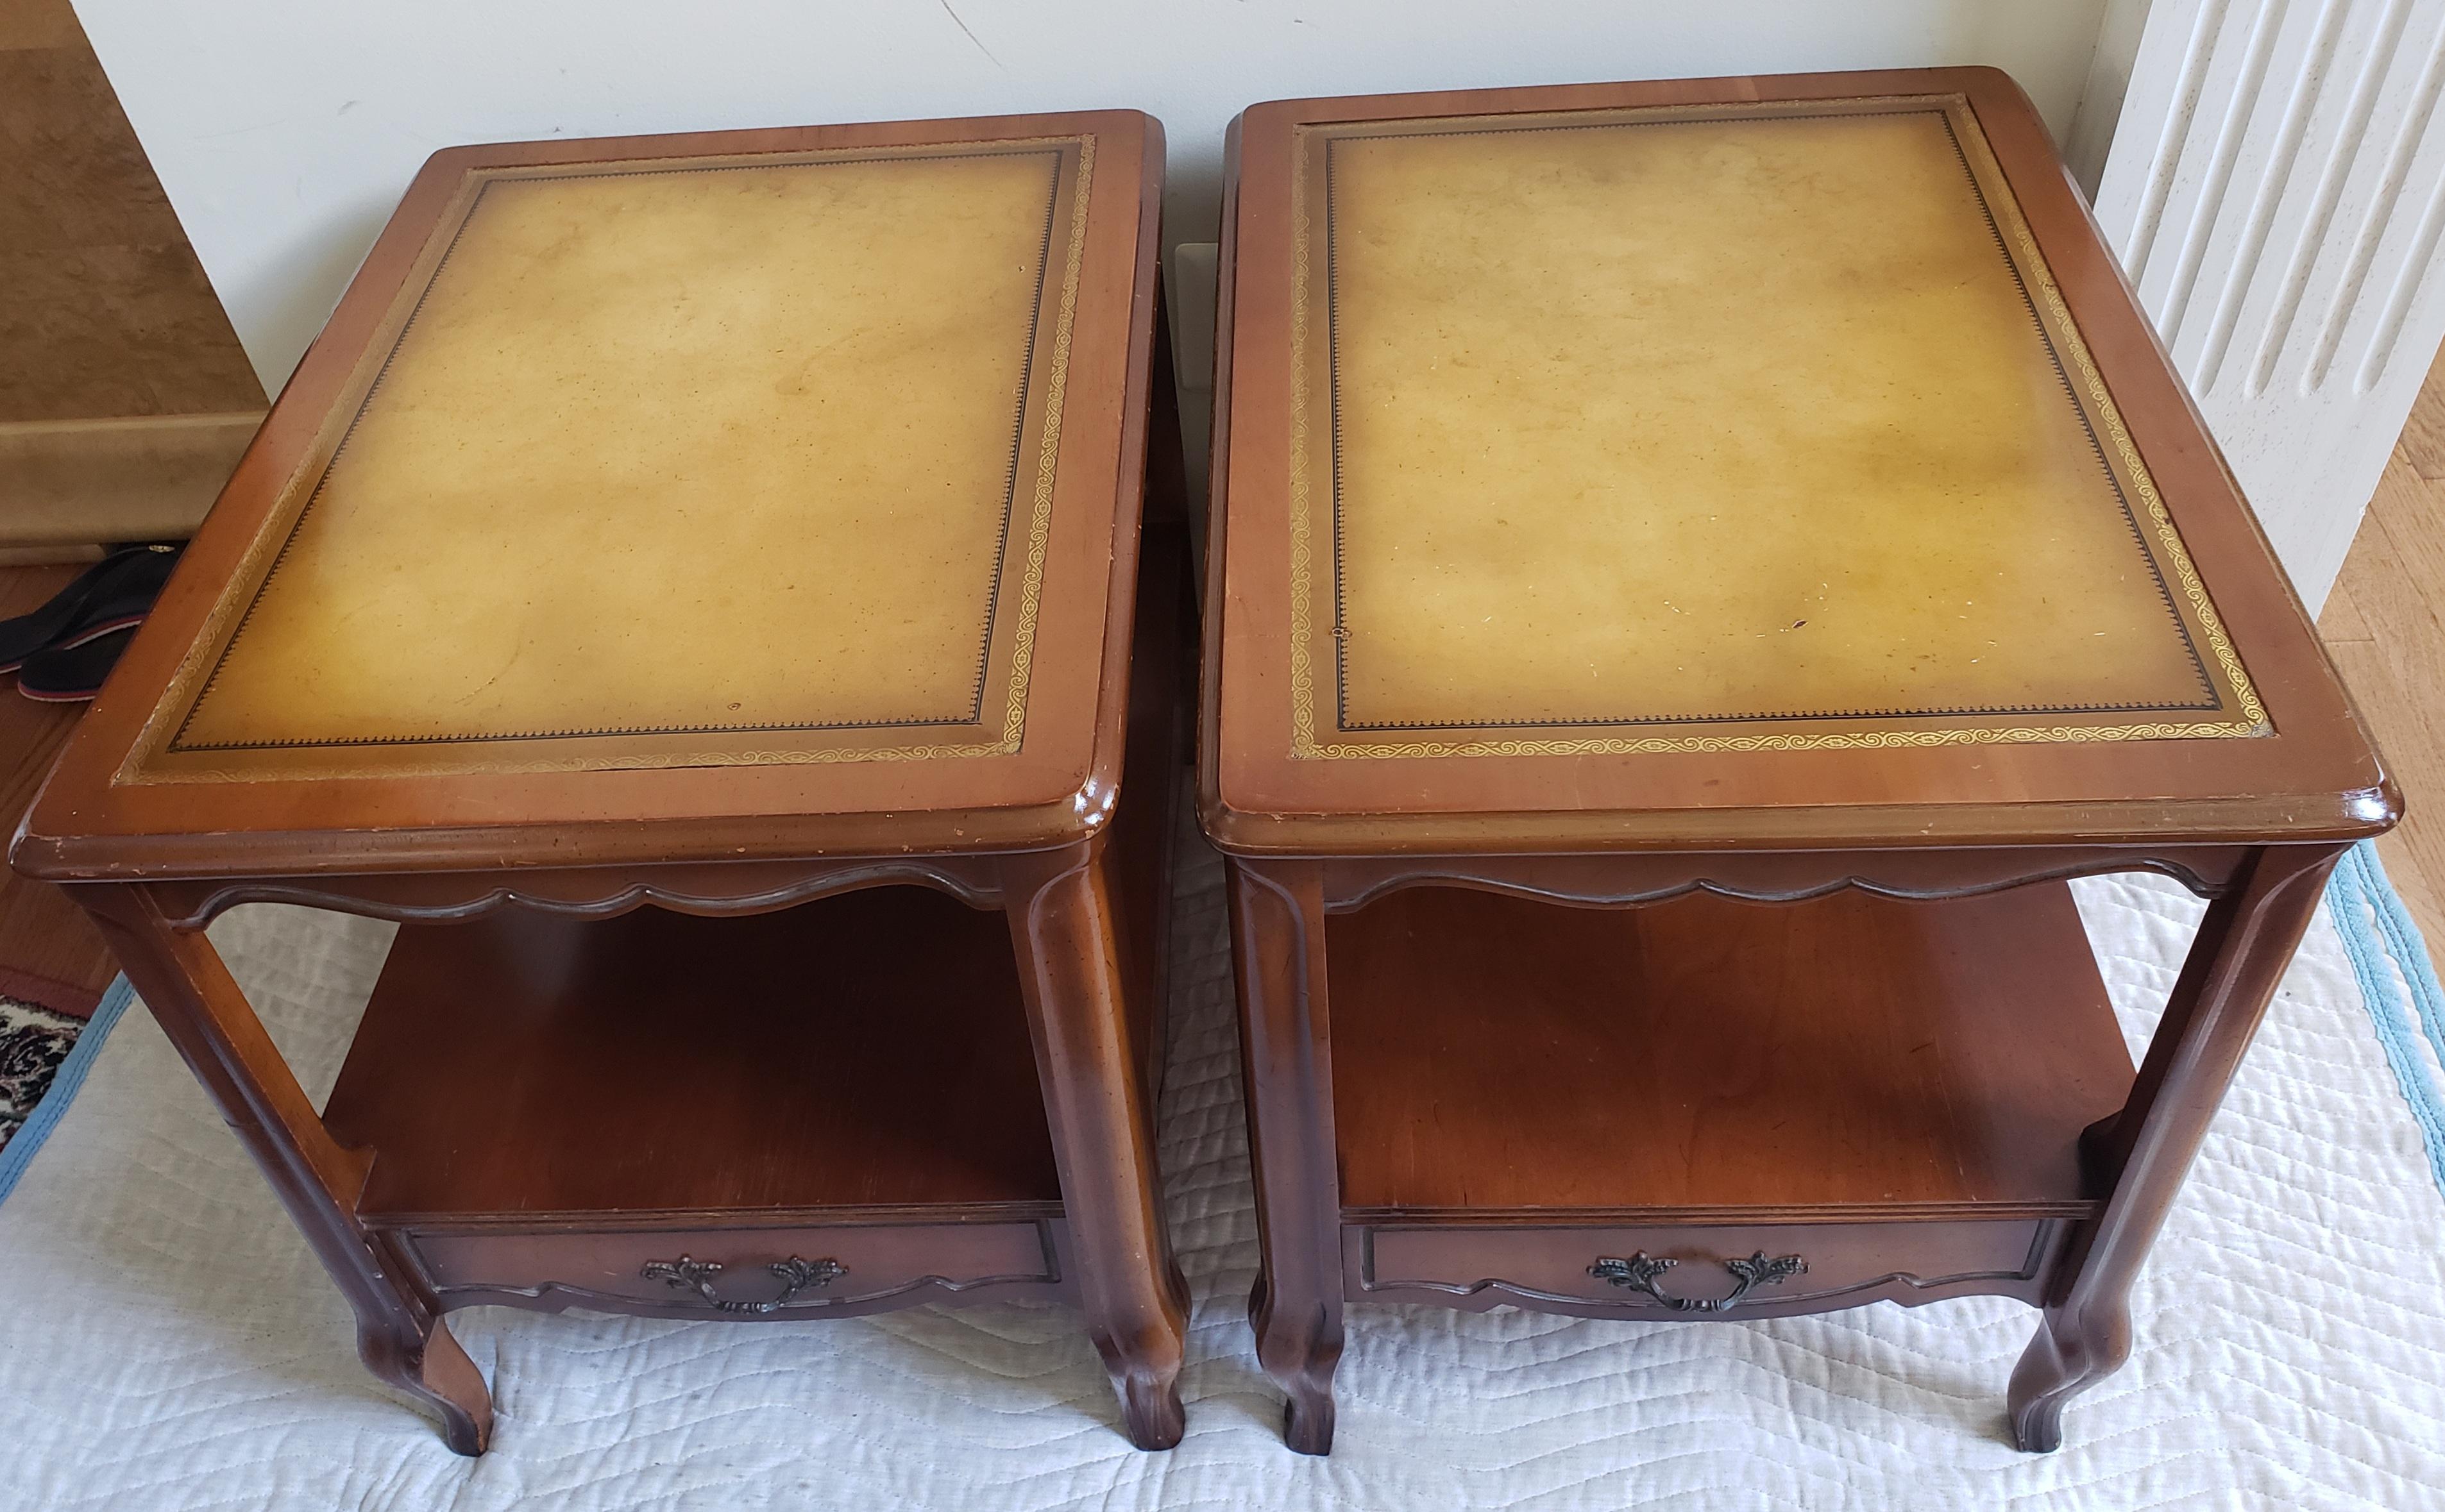 A pair of French Provincial style vintage side tables with leaves and Stinciling top. The tables feature a dark oak frame with a leather top insert, scalloped edges. Each table has a lower drawer with a scrolled pull and decorative cabriole legs.